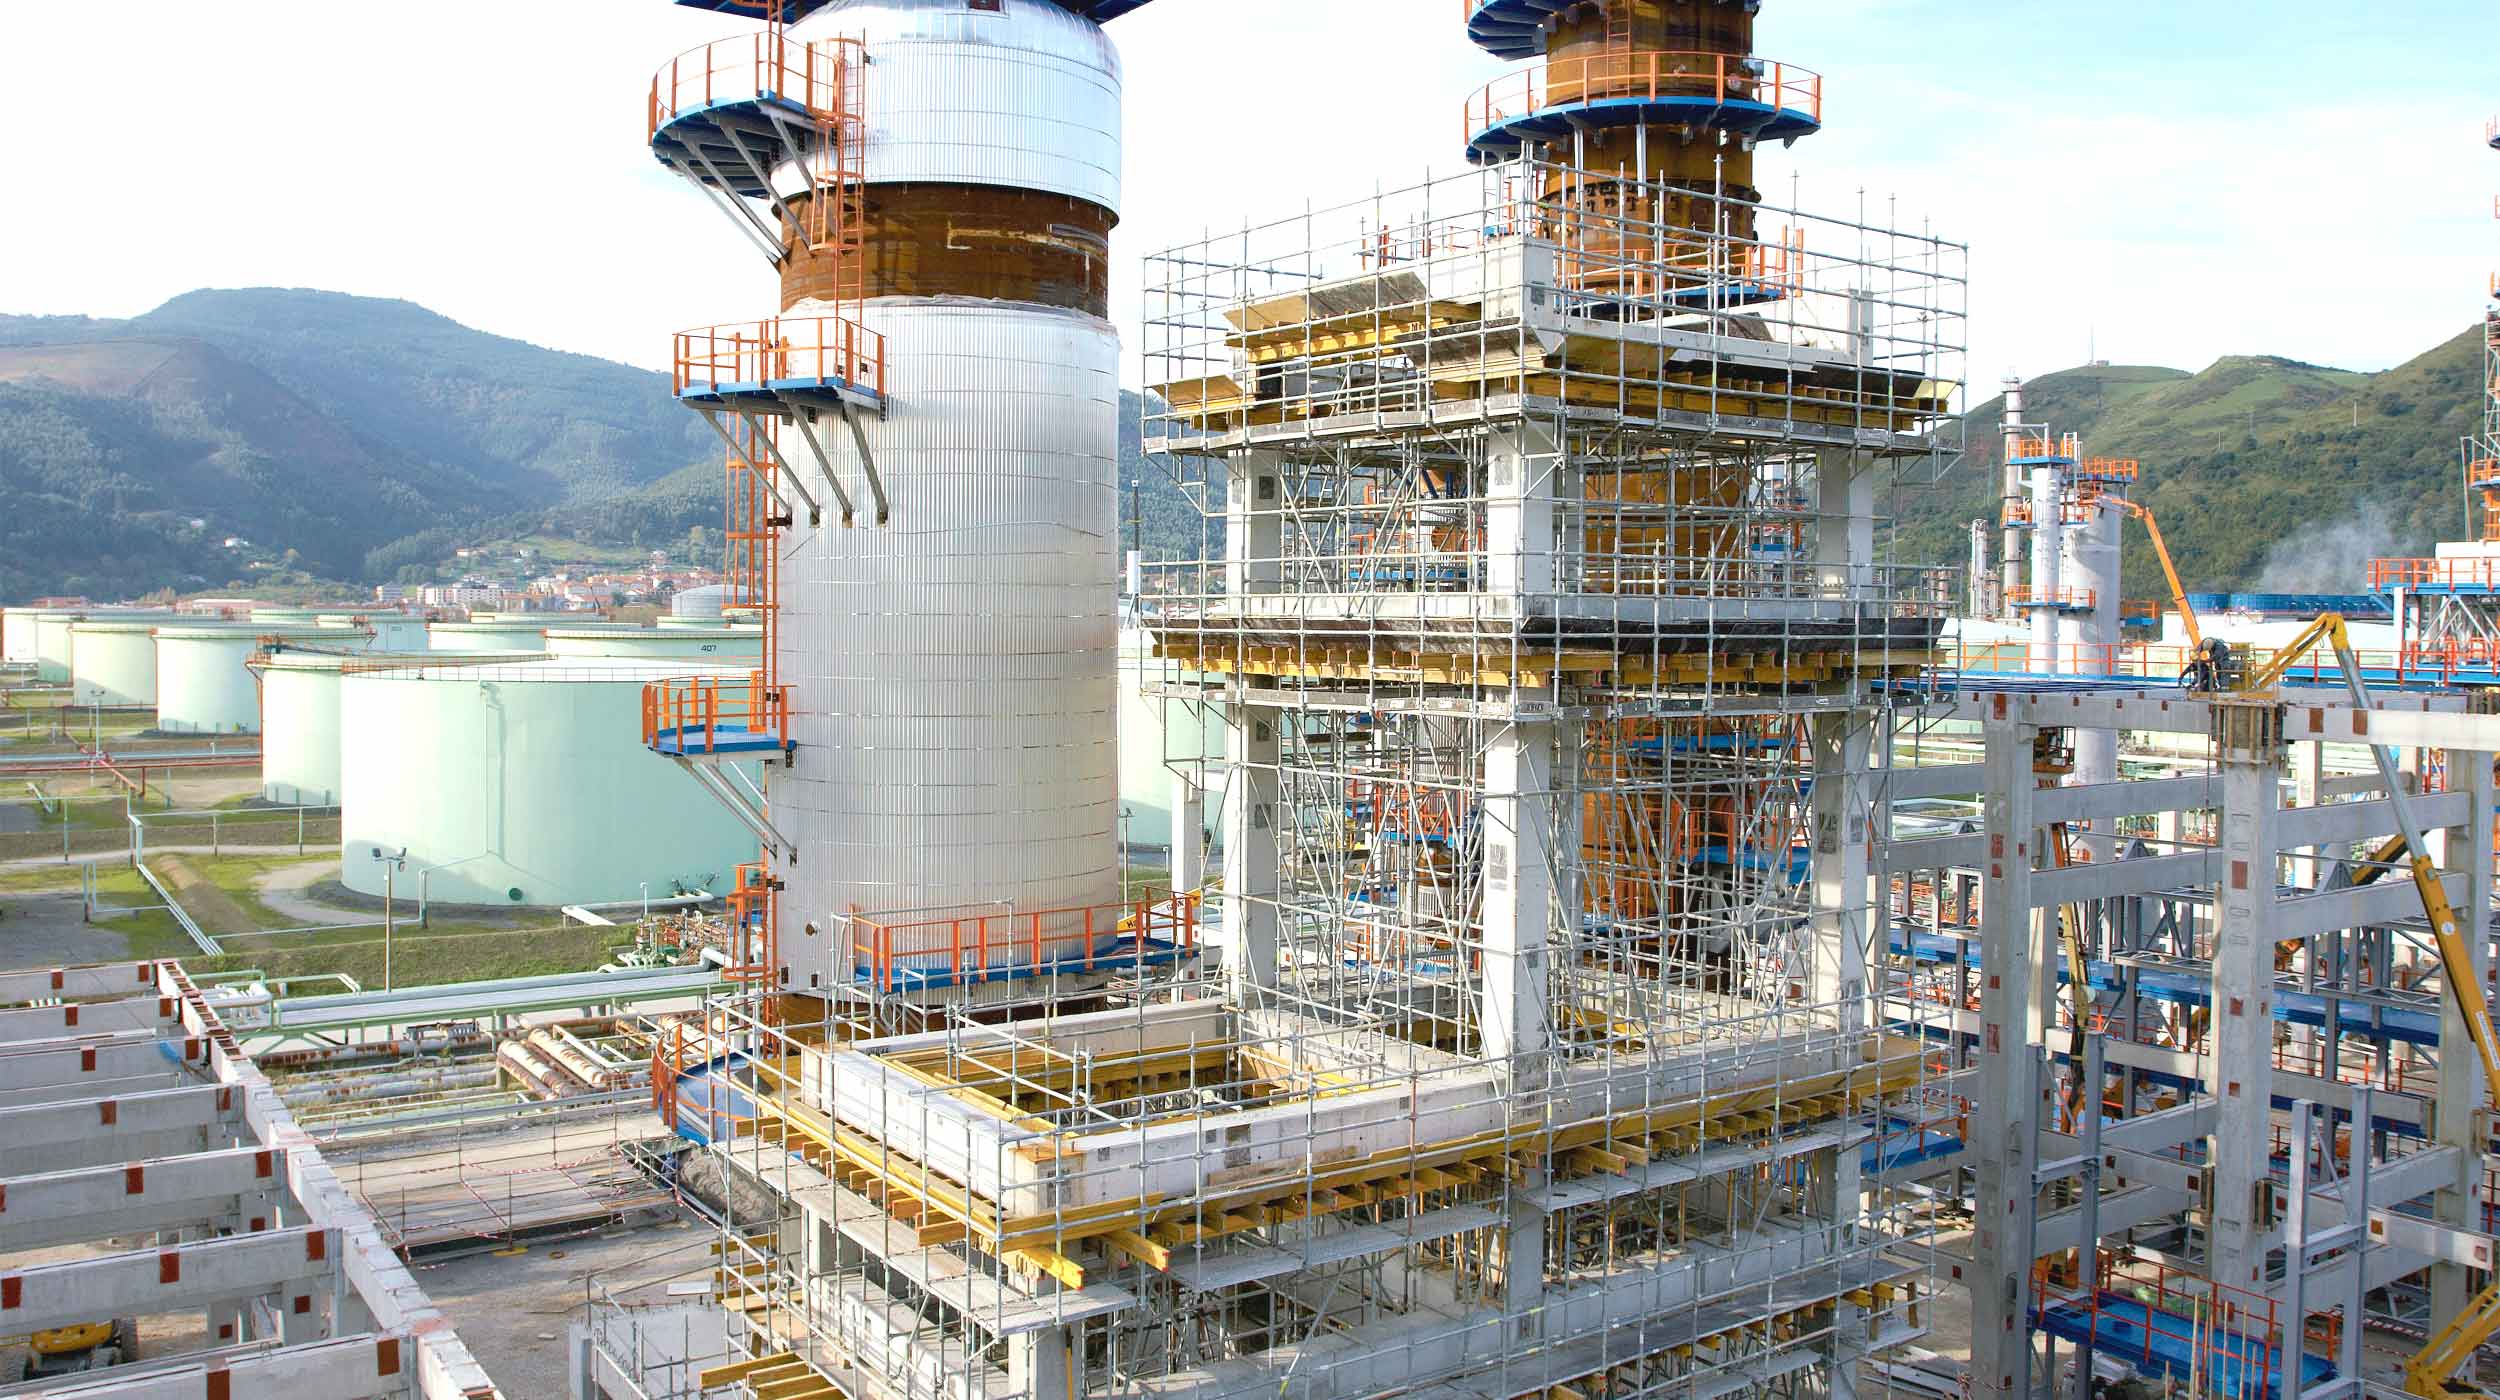 The Petronor refinery, with more than 40 years of activity, is the plant with the most capacity in the peninsula, and one of the most important in Europe.